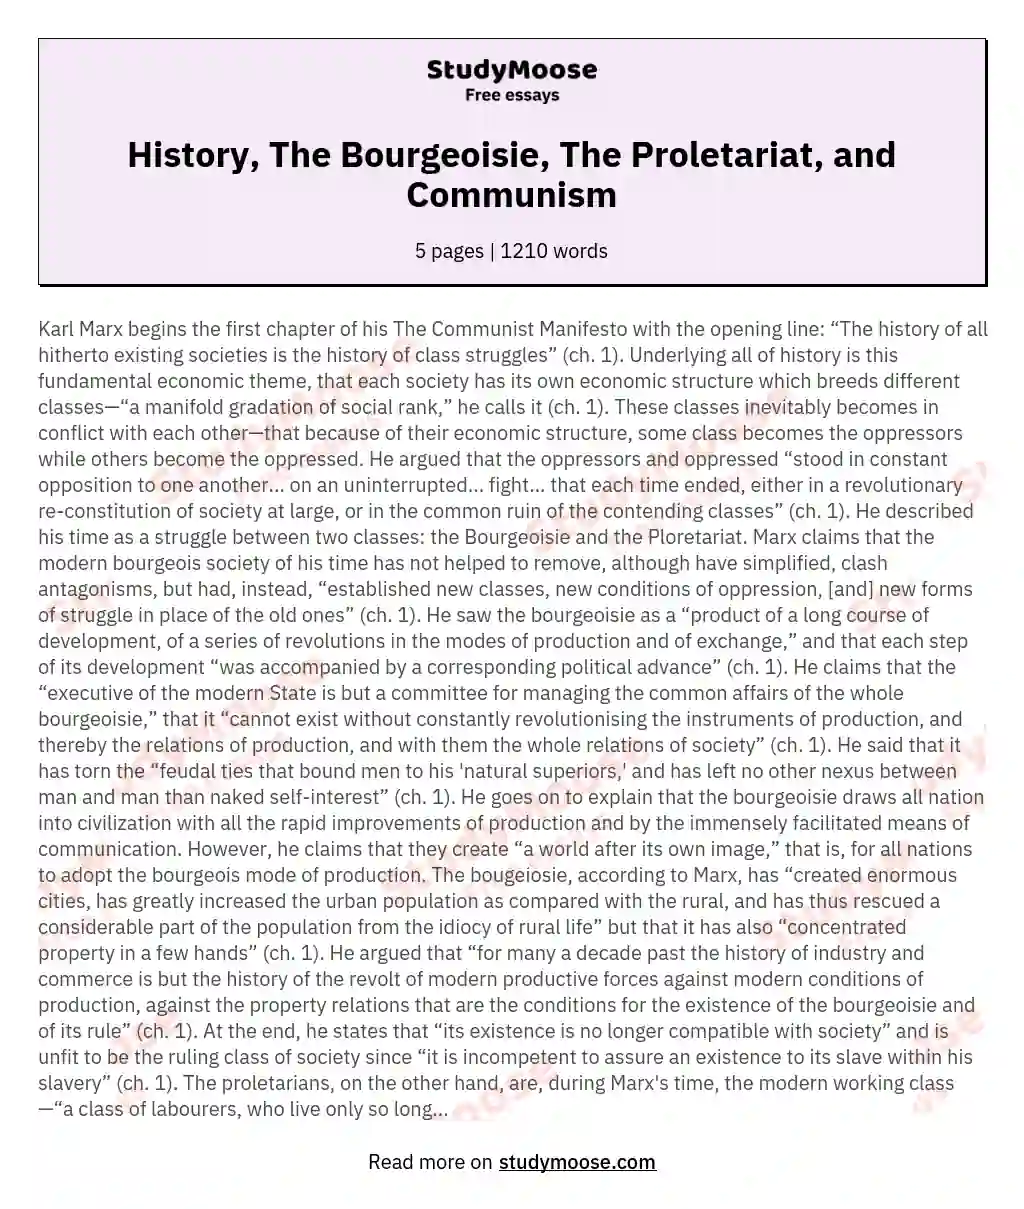 History, The Bourgeoisie, The Proletariat, and Communism essay